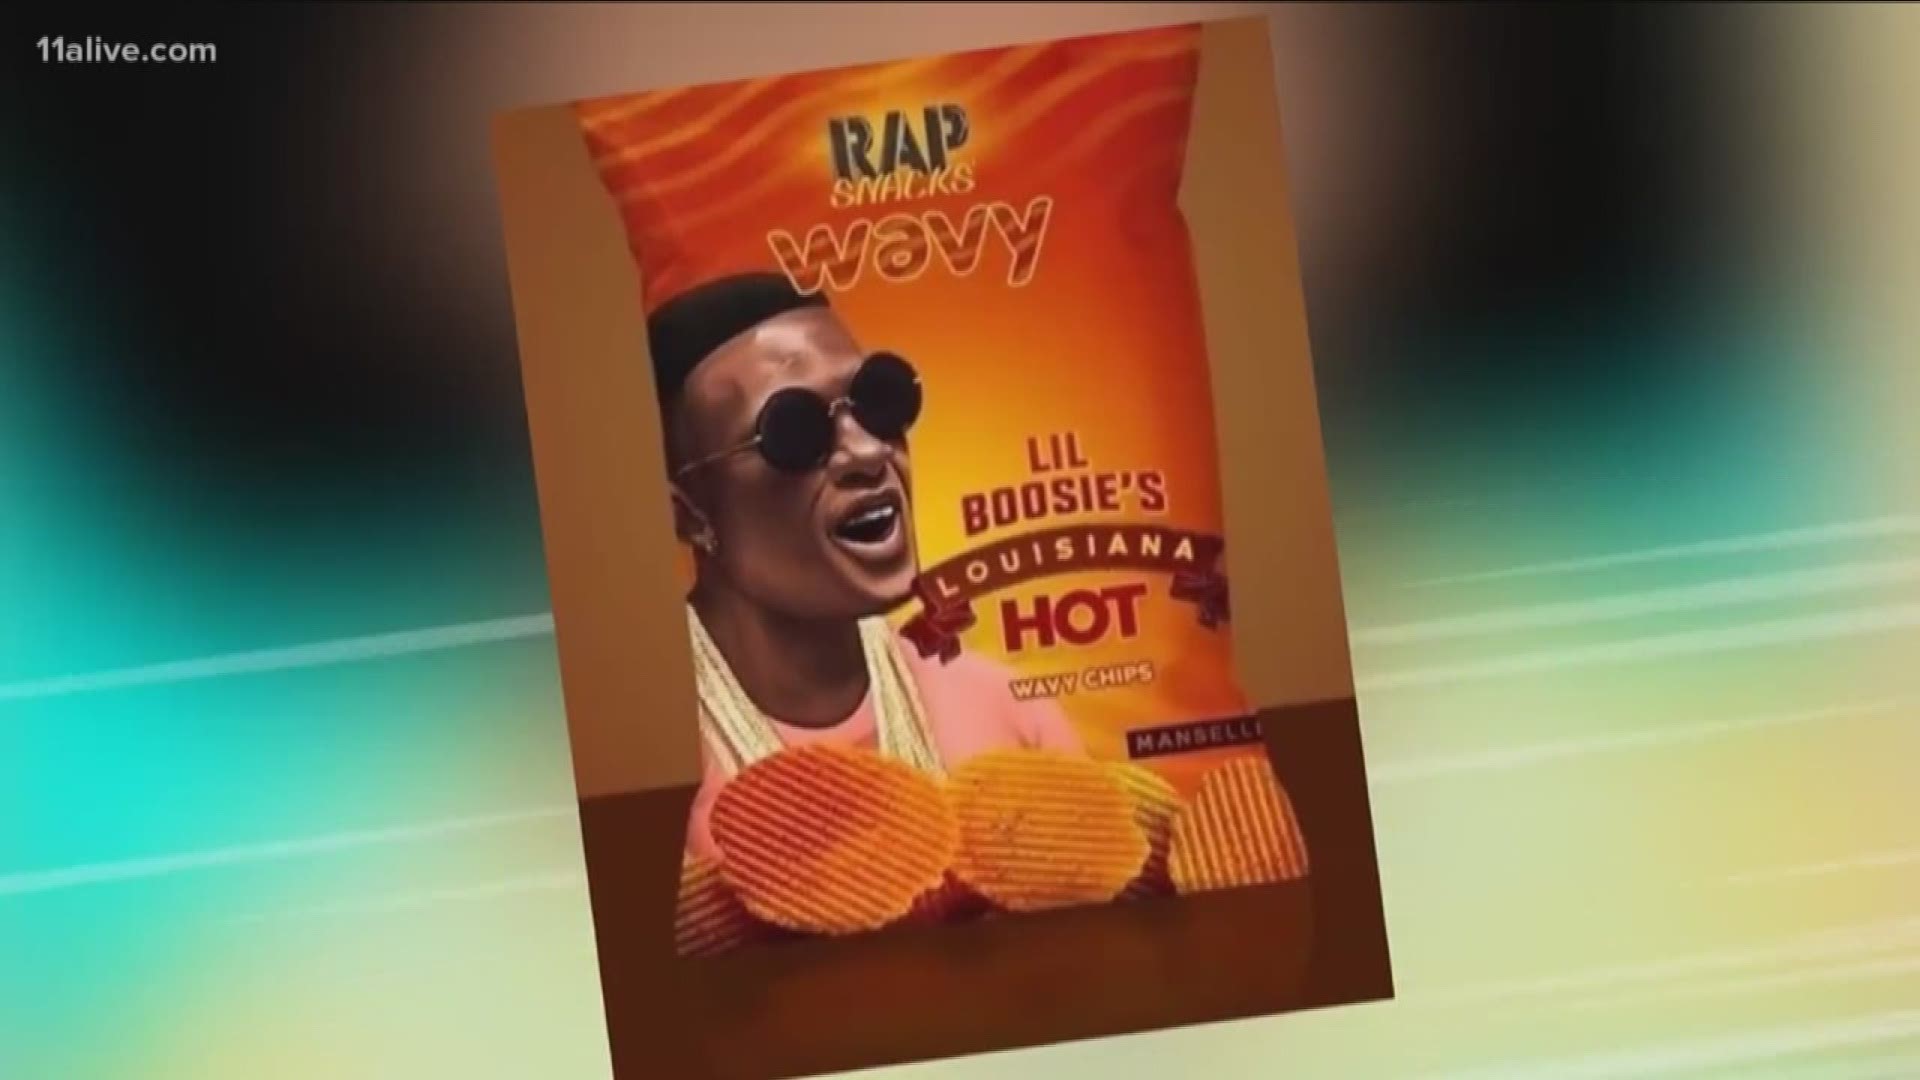 It's the snack food that has become the face of one of the biggest music genres in Atlanta, Rap Snacks potato chips, the flavor of hip-hop!"You have Fetty Wap, you got Lil' Boosie, you have Lil Romeo, Trina," Lindsay explained the all-star roster of amb